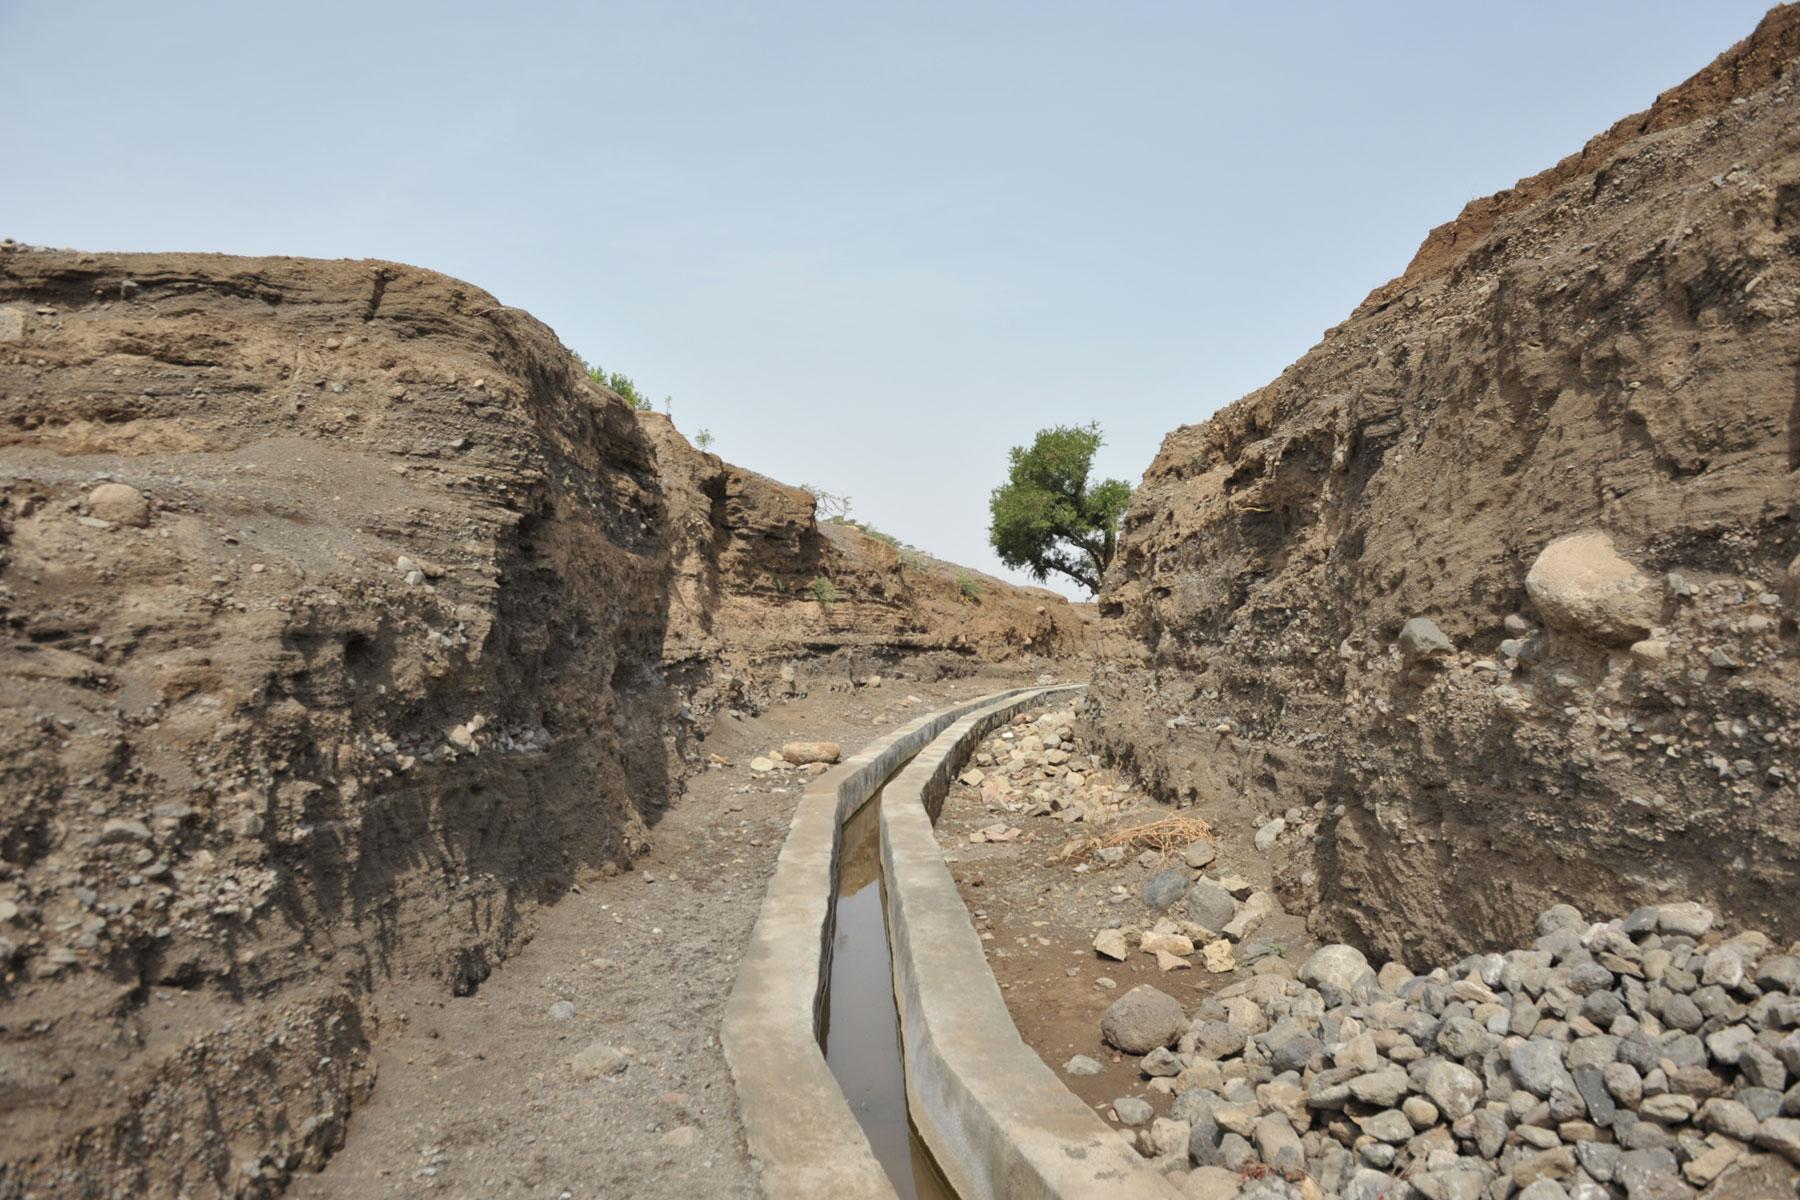 In a country experiencing recurring drought, the LWF country program work in Ethiopia includes support to farmers in Lalibela to build irrigation canals and terraces for food and water conservation. Photo: LWF/ C. KÃ¤stner 